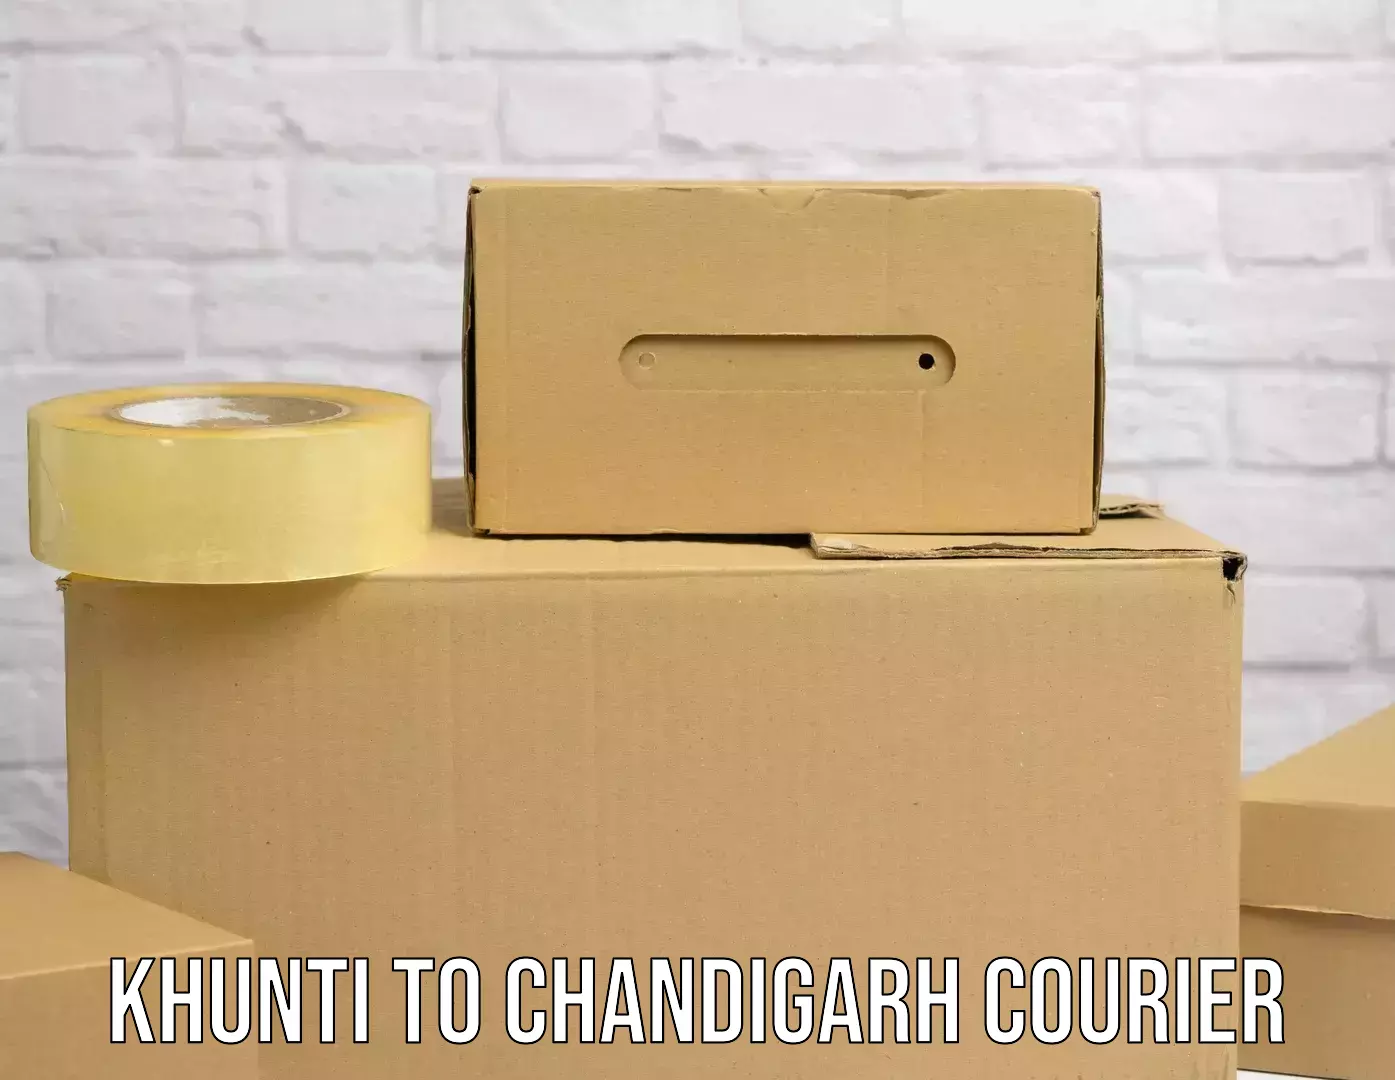 24/7 courier service Khunti to Chandigarh